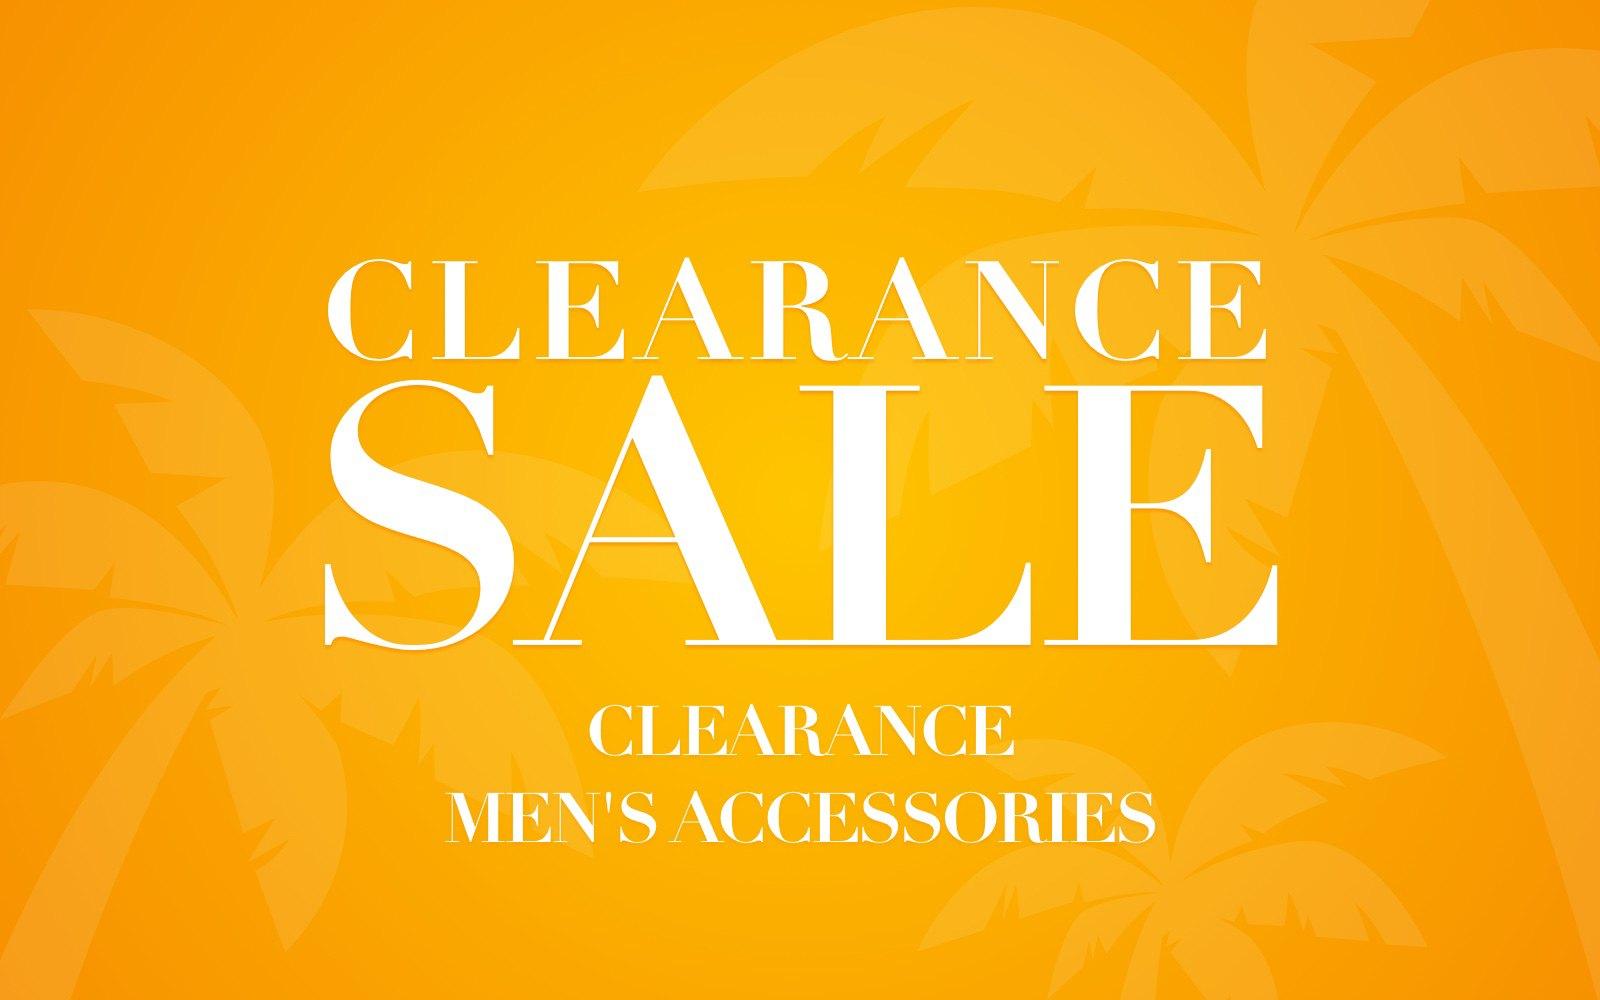 Clearance Men's Accessories